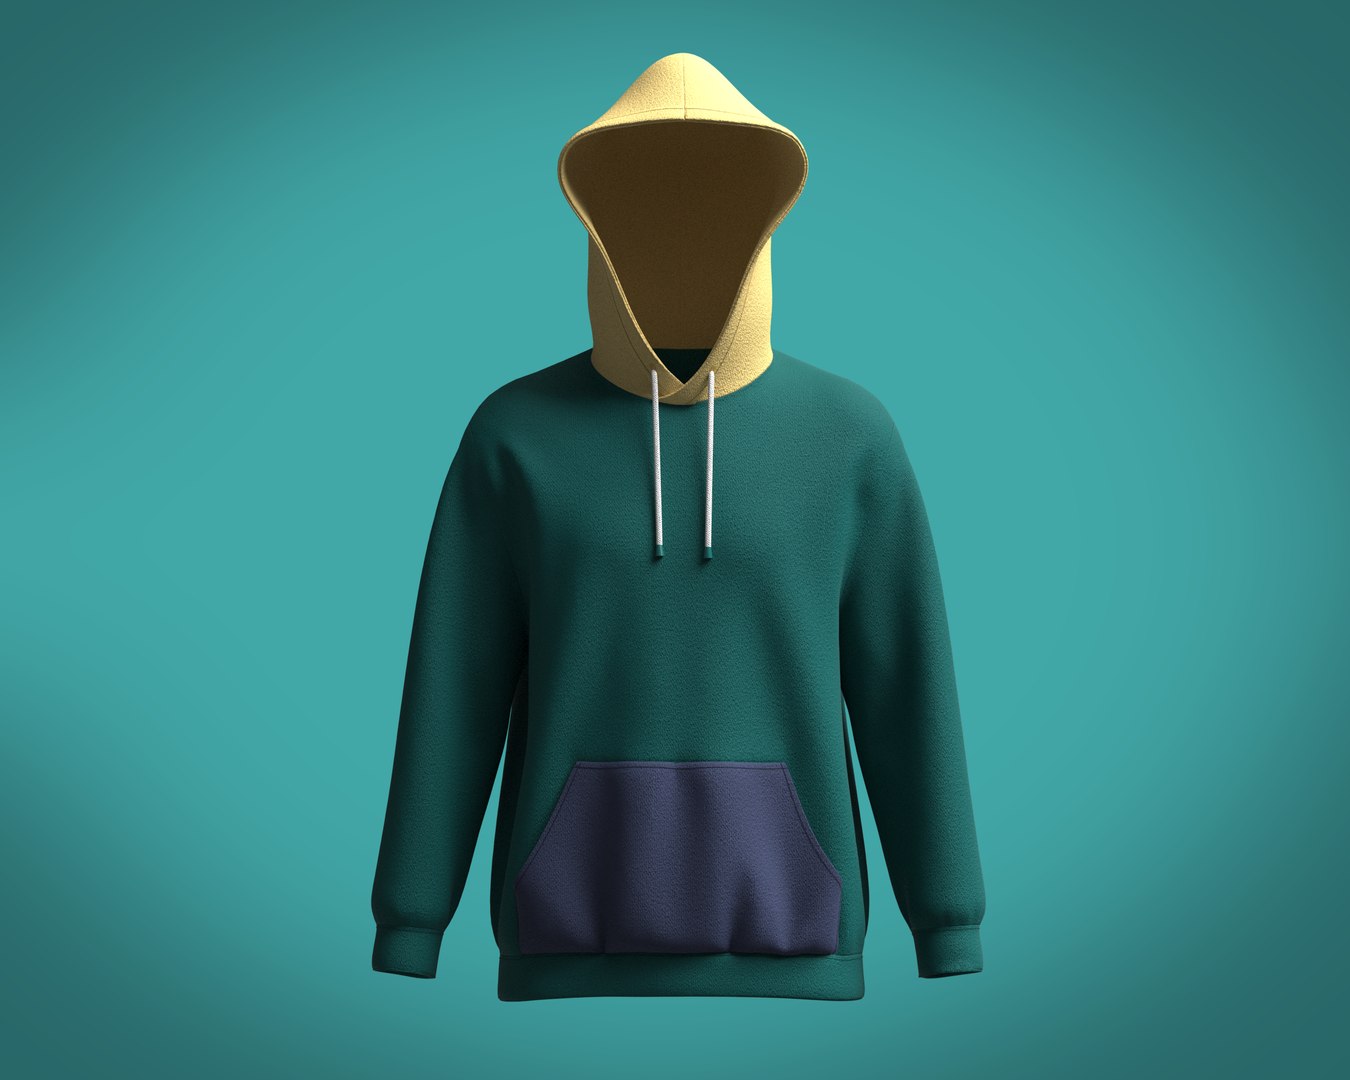 81,994 Hoodie Design Images, Stock Photos, 3D objects, & Vectors